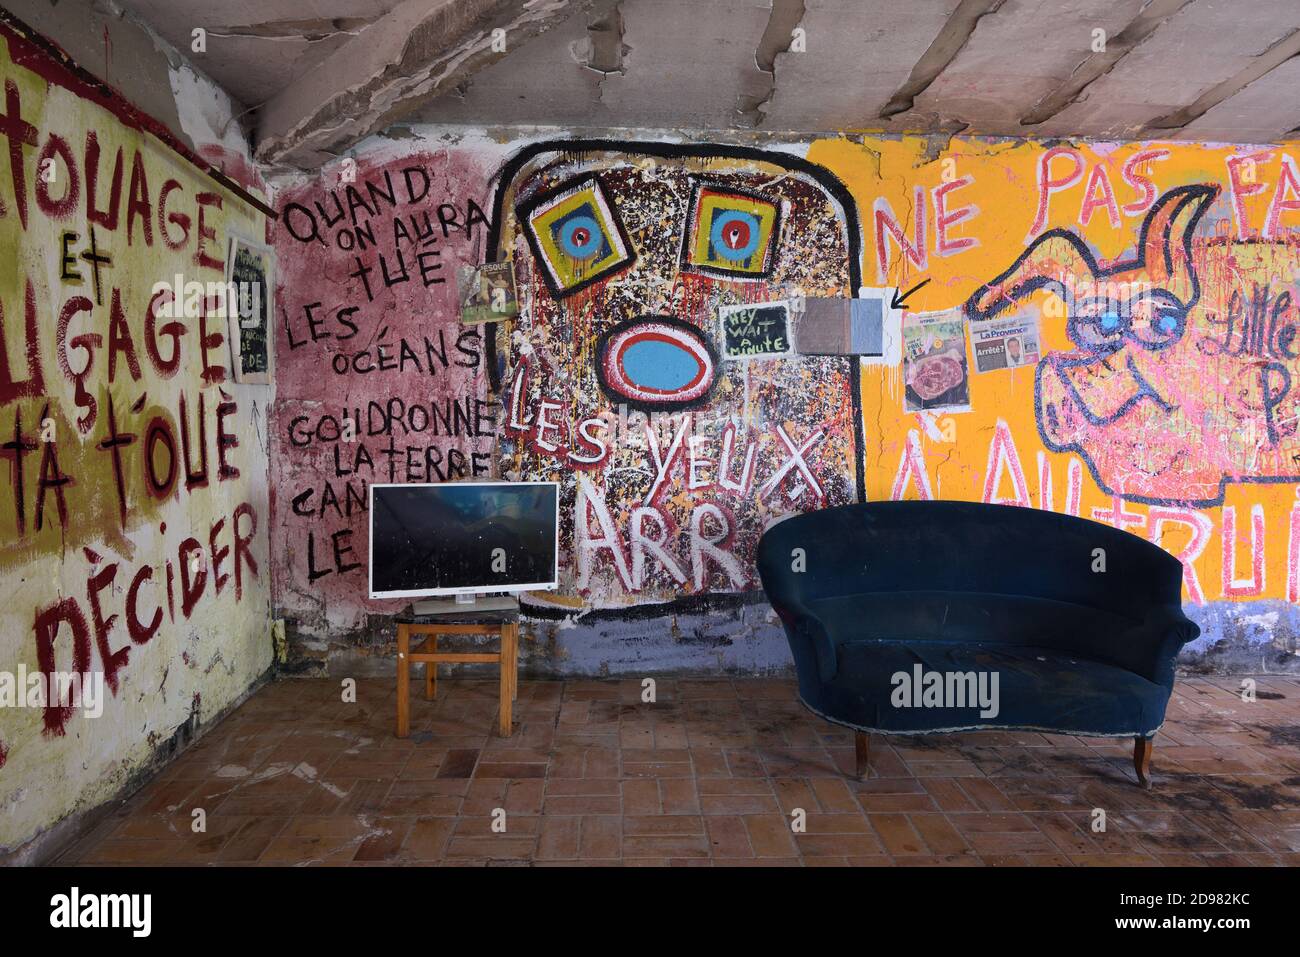 Abandoned Graffiti Covered House Interior or Living Room with Old Sofa and Televisin Screen or Urbex Scene France Stock Photo